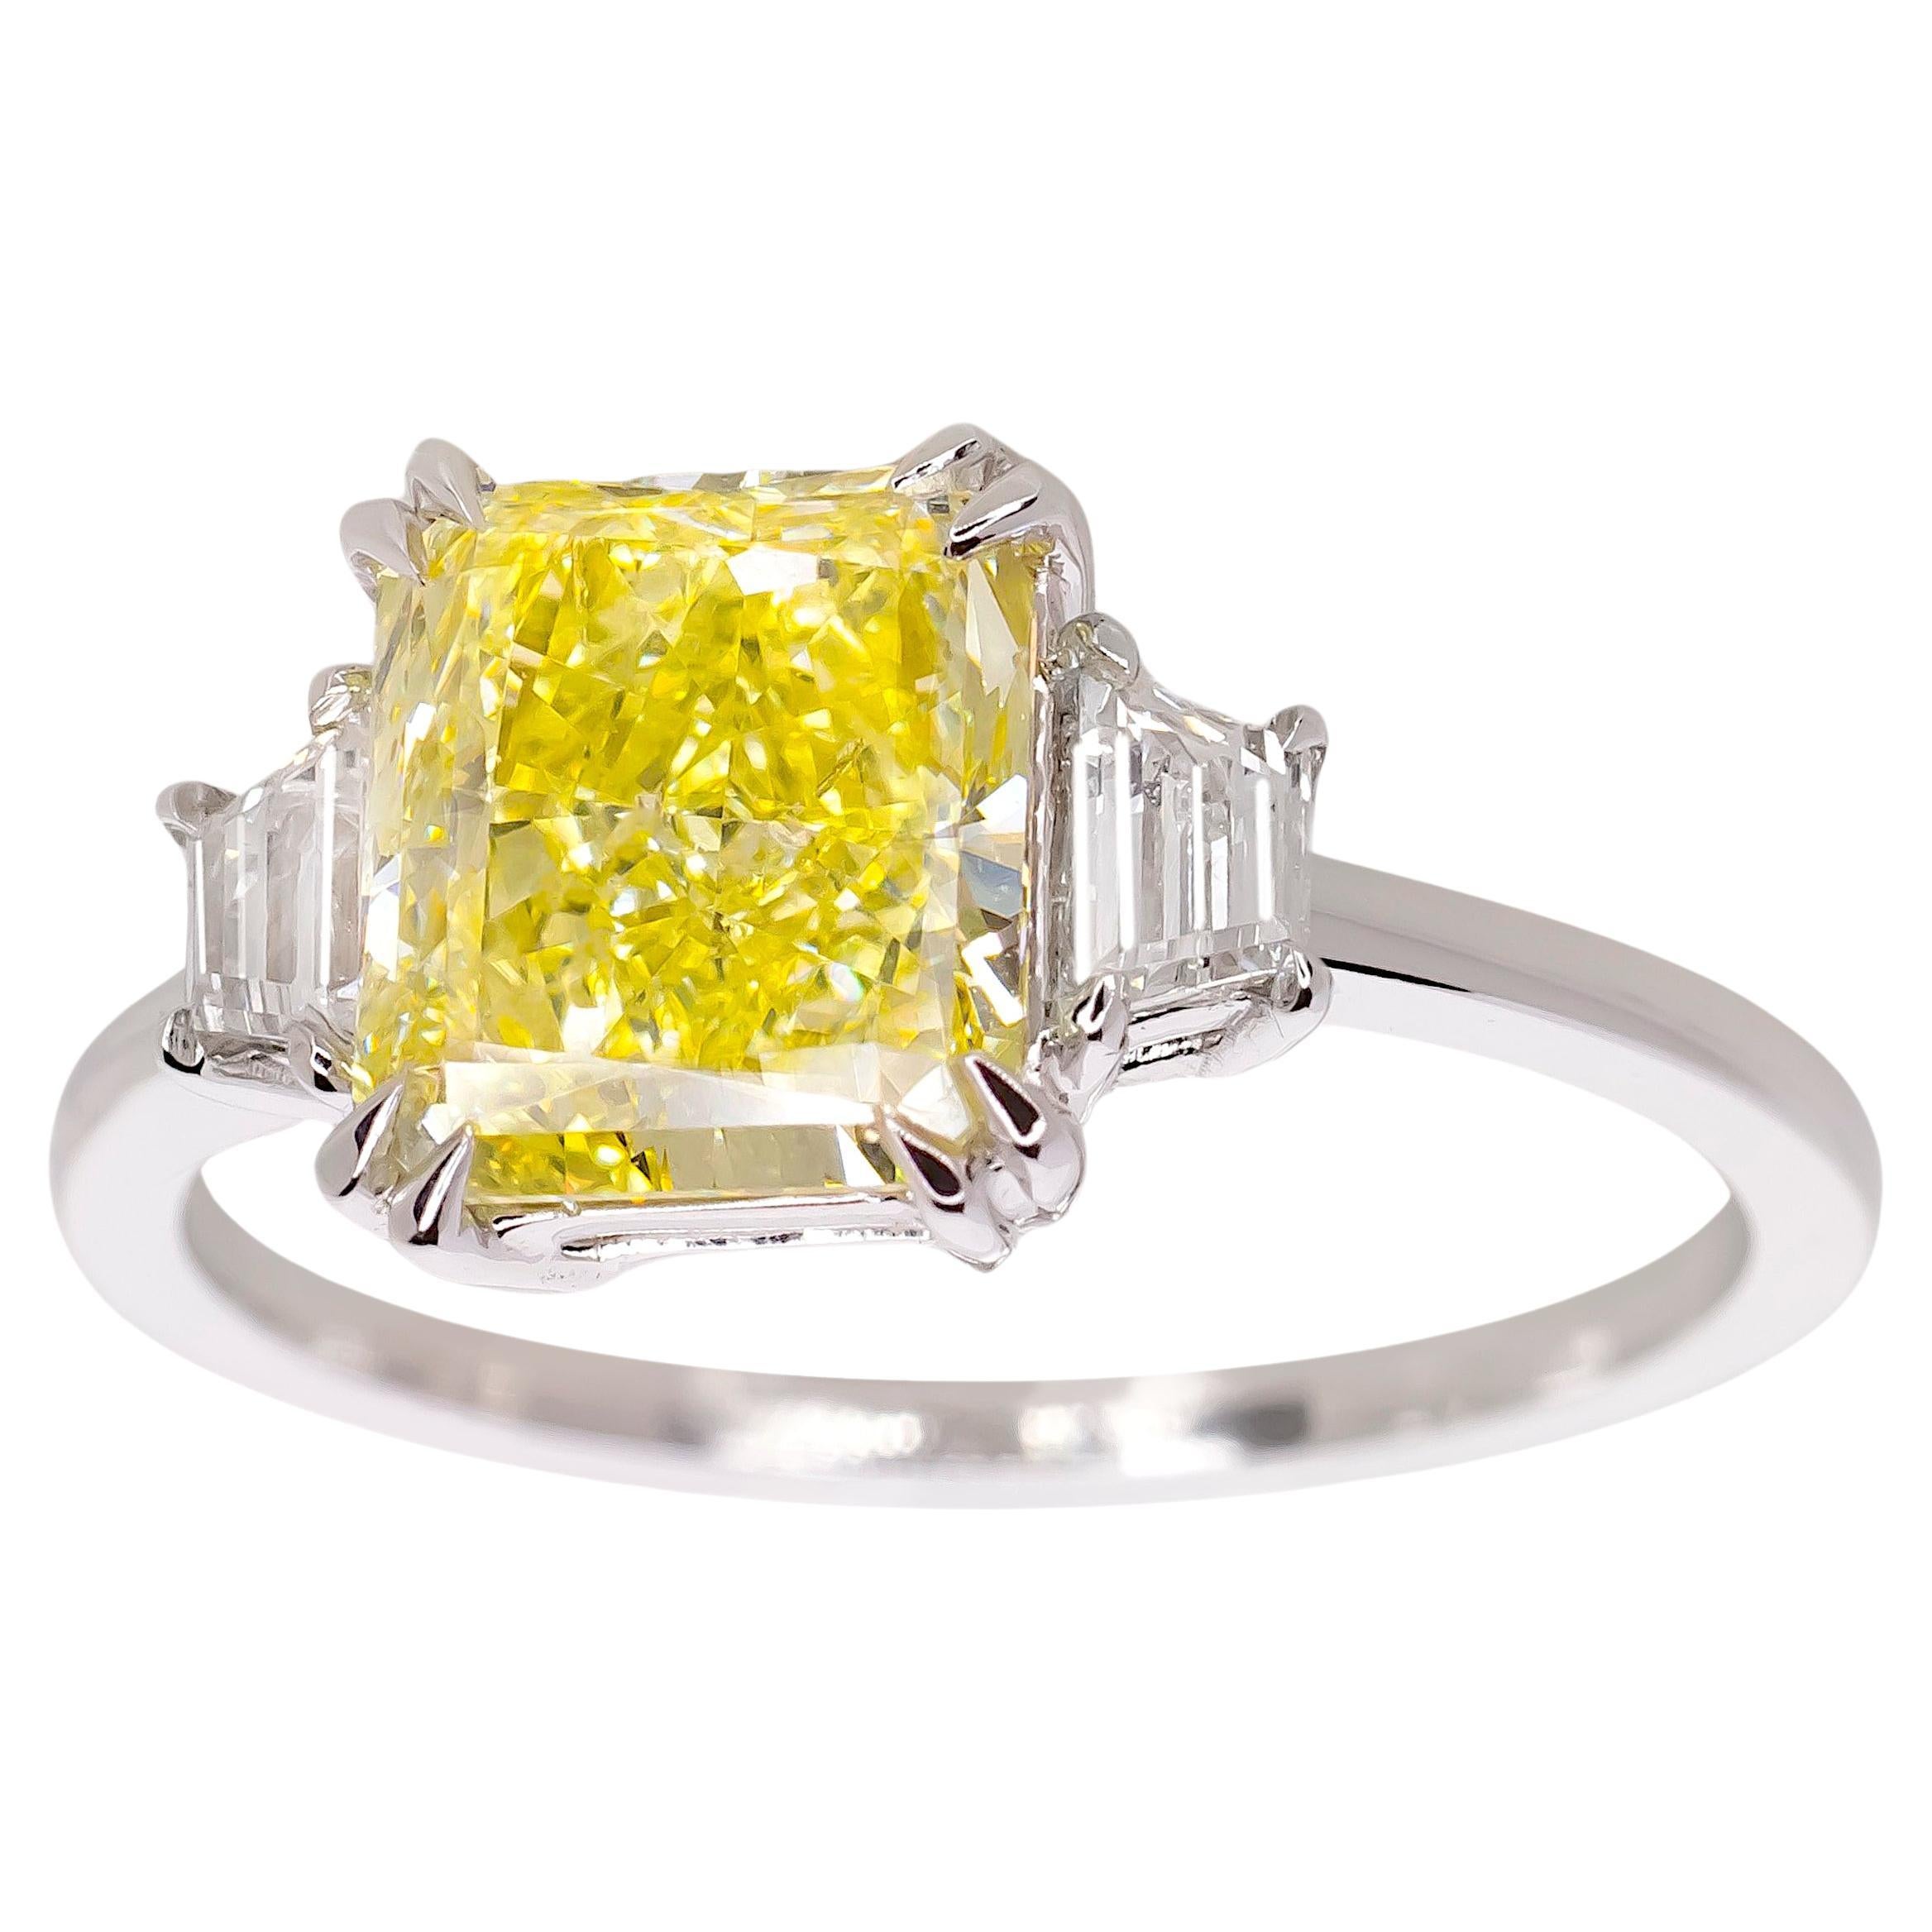 GIA Certified 1.38 Carat Fancy Yellow Radiant Cut Diamond 18K White Gold Ring For Sale